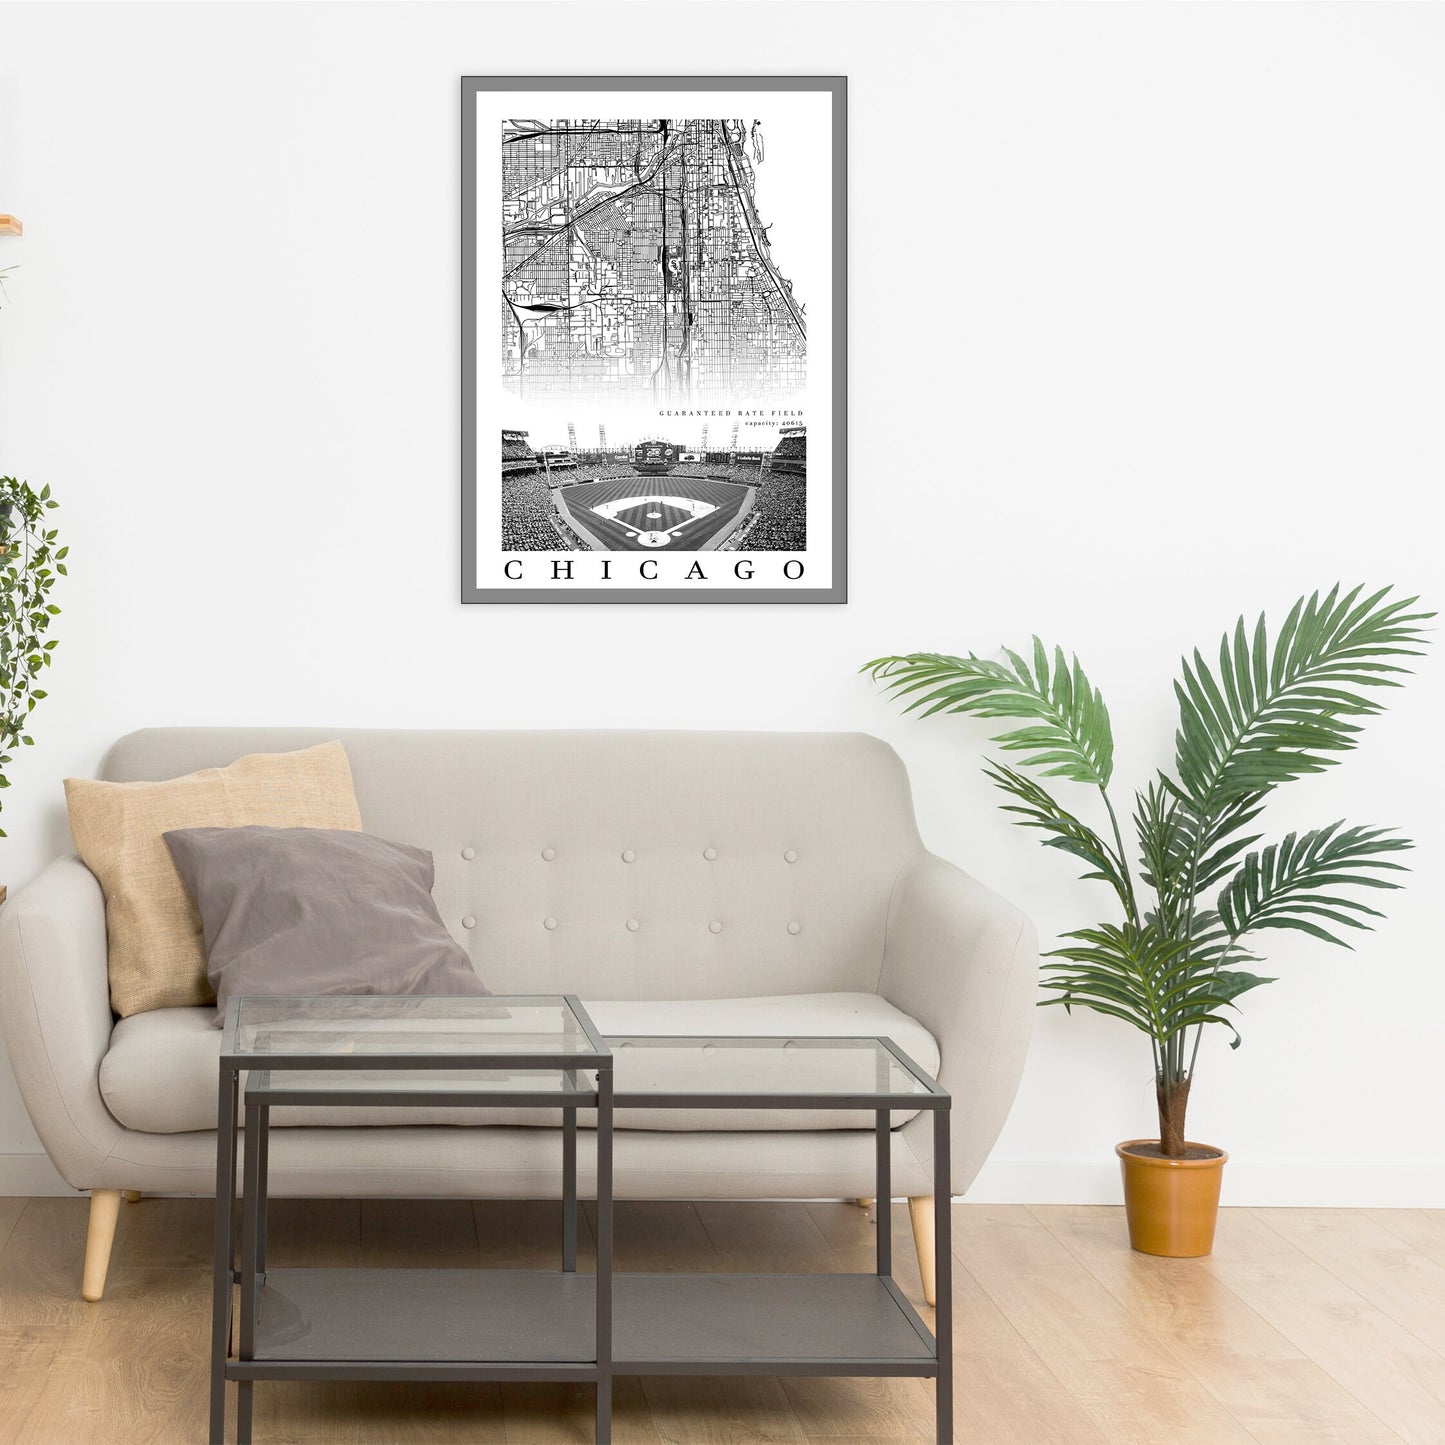 City map of CHICAGO - Guaranteed Rate Field - Home Decor Chicago - Guaranteed Rate Field wall decor - Print map - Chicago White Sox